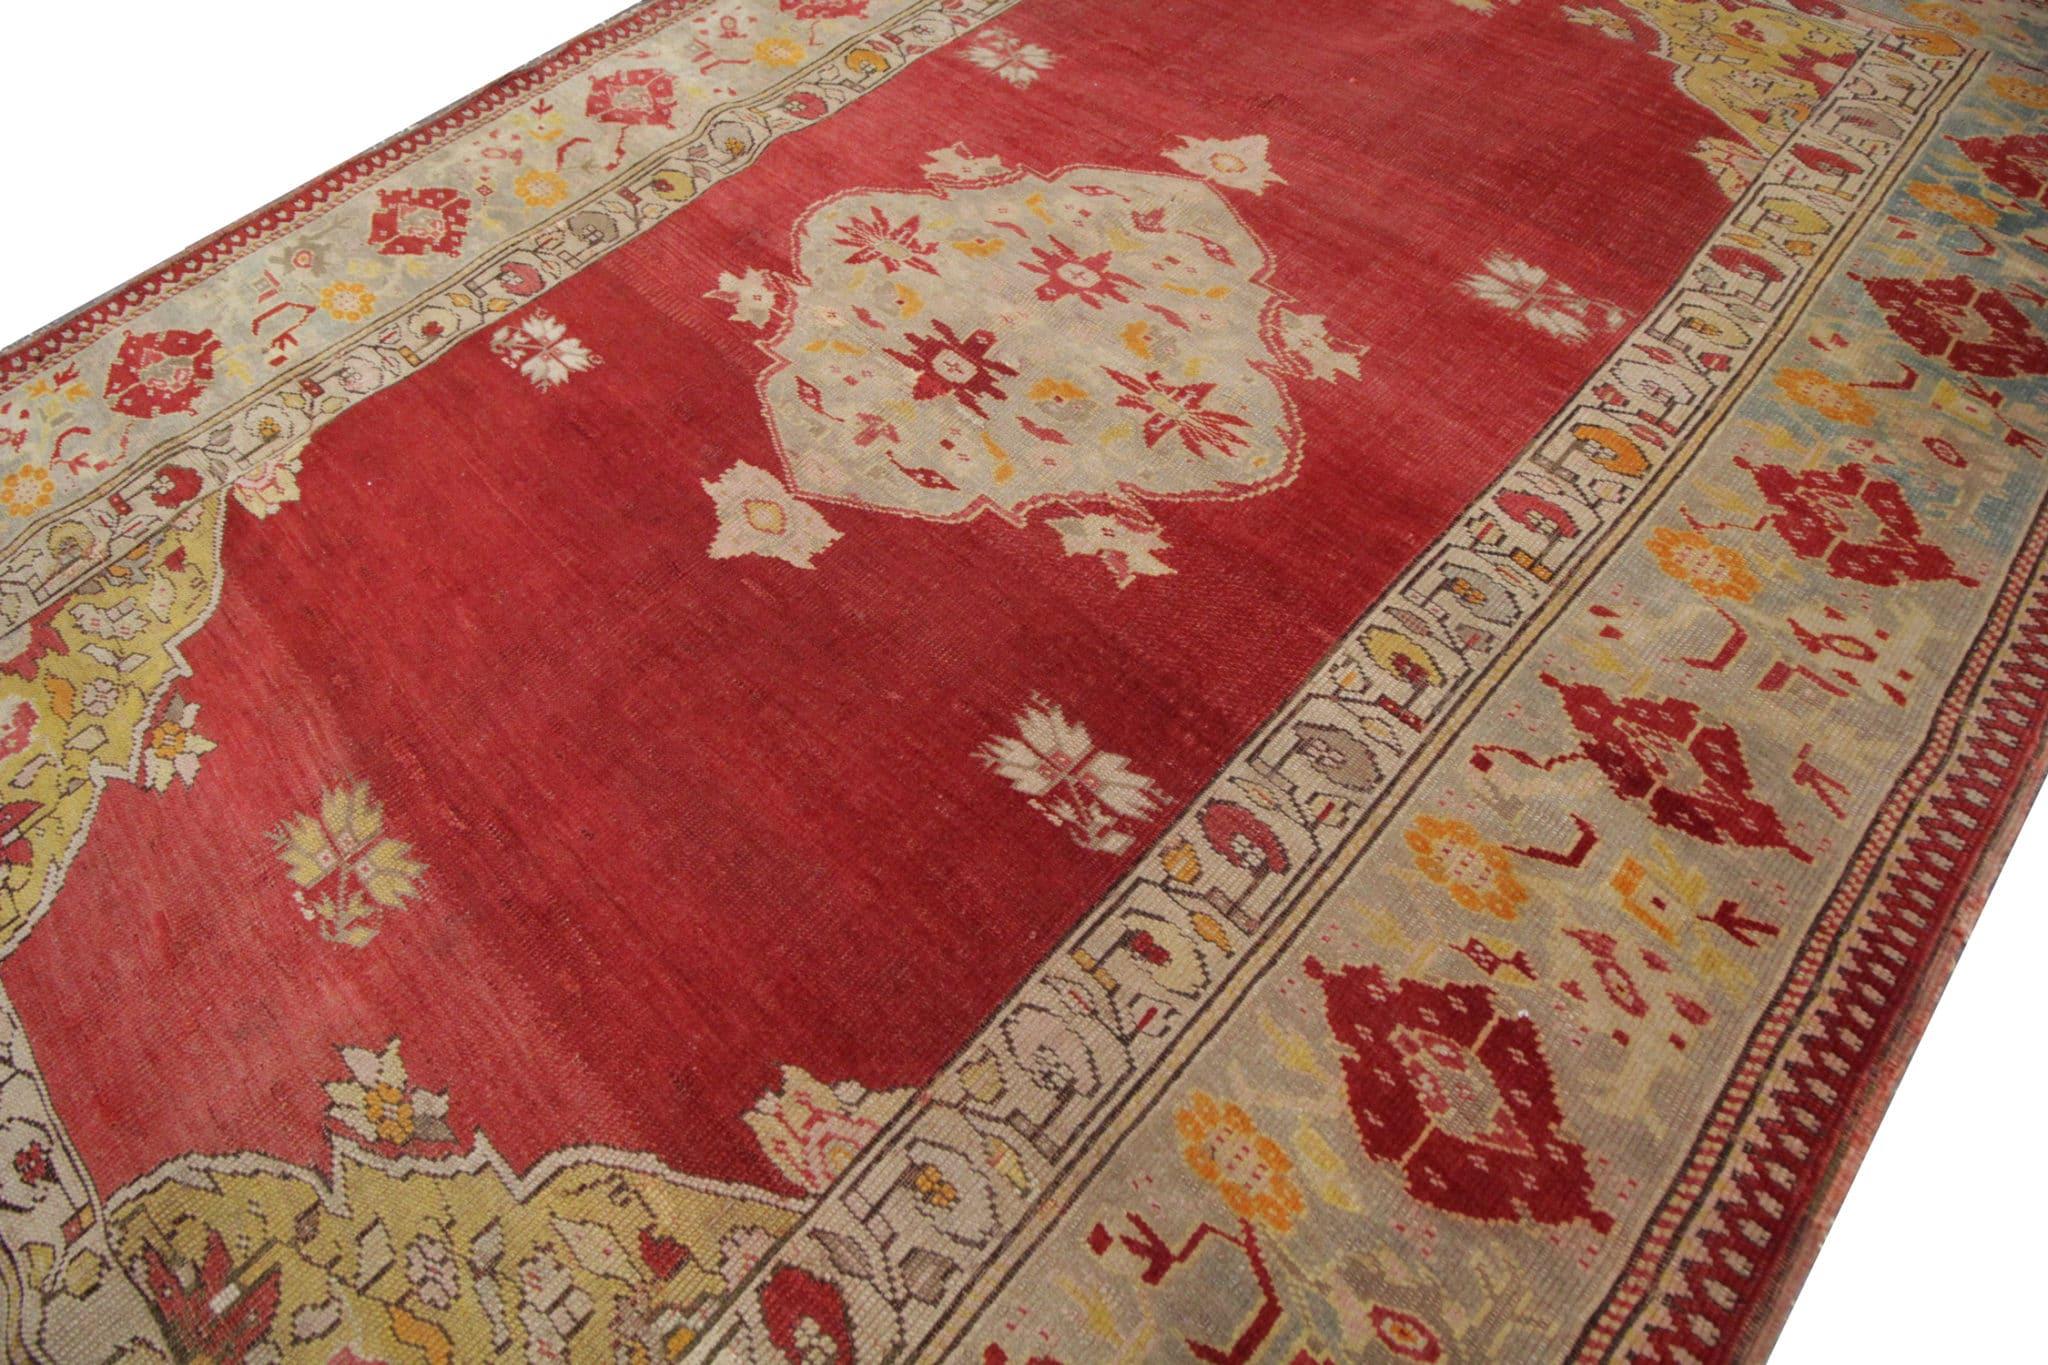 Handmade carpet oriental rug, dating back to the 1890s, this exquisite piece hails from the history, showcasing the finest craftsmanship of its time. Hand-knotted with precision, it exudes an air of authenticity and elegance that effortlessly